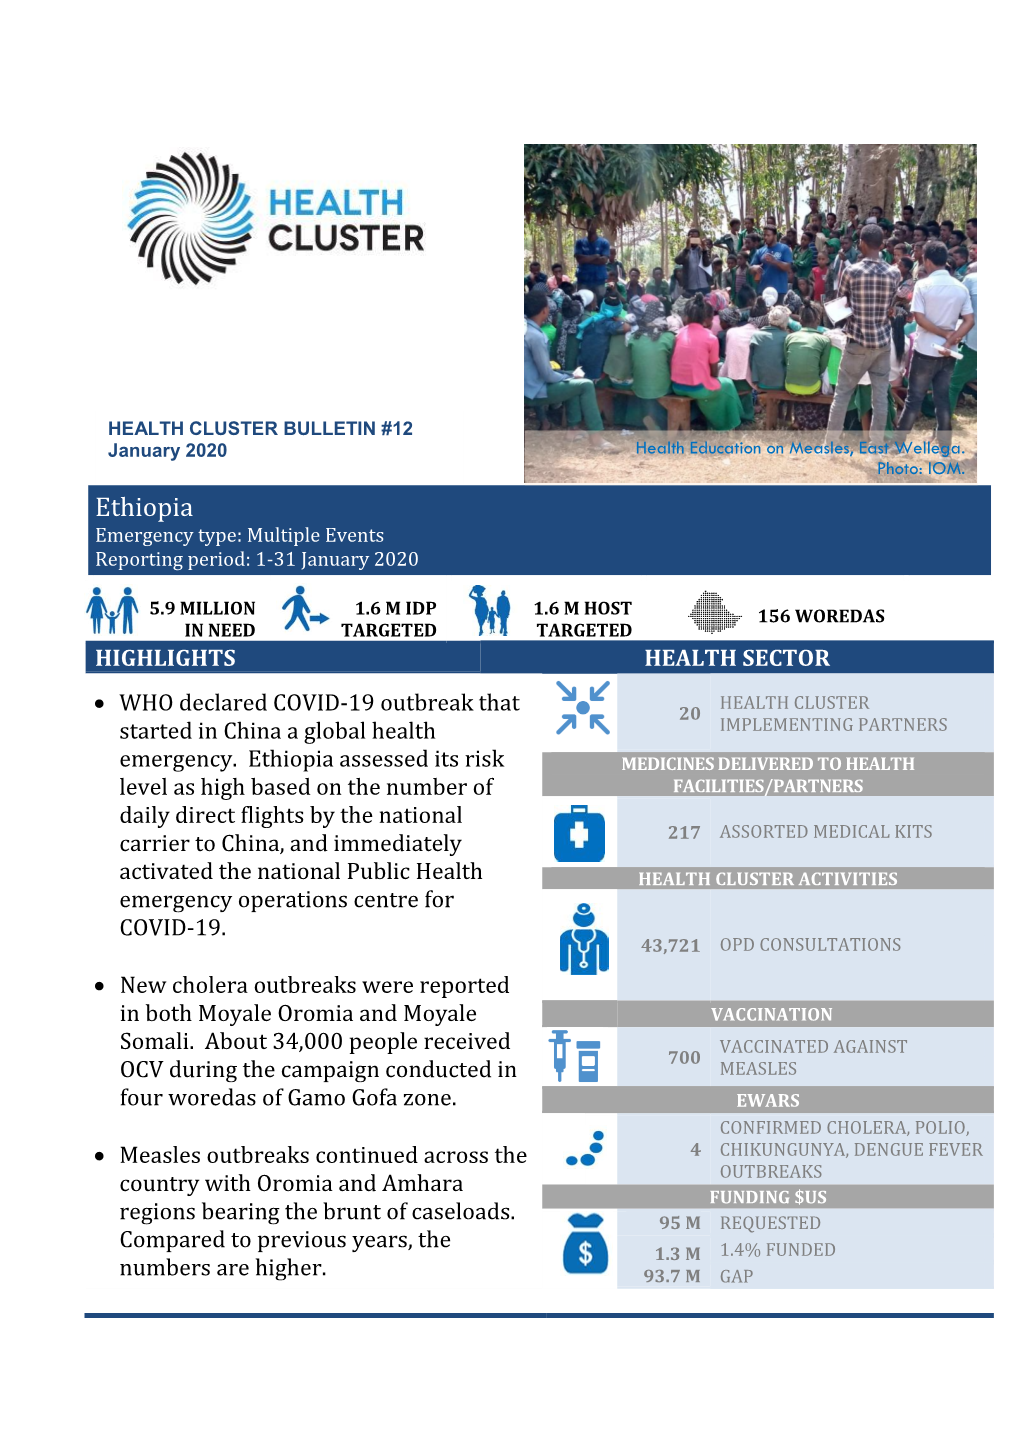 Ethiopia Emergency Type: Multiple Events Reporting Period: 1-31 January 2020